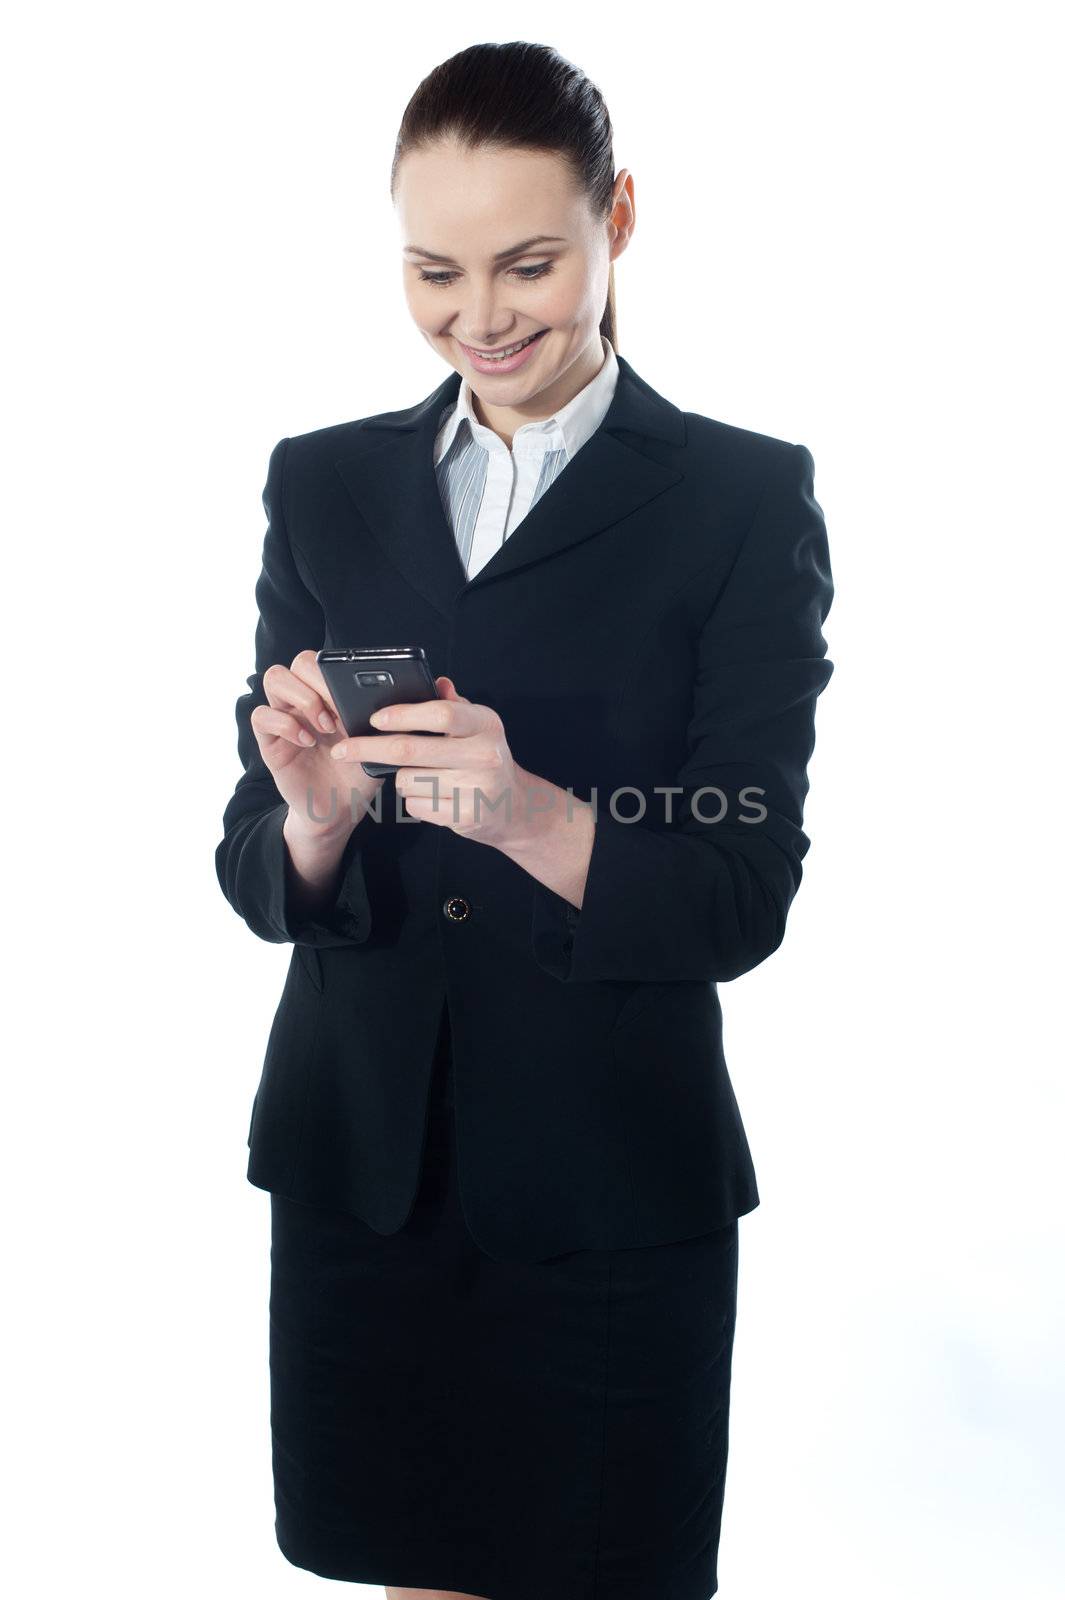 Confident businessperson messaging by stockyimages